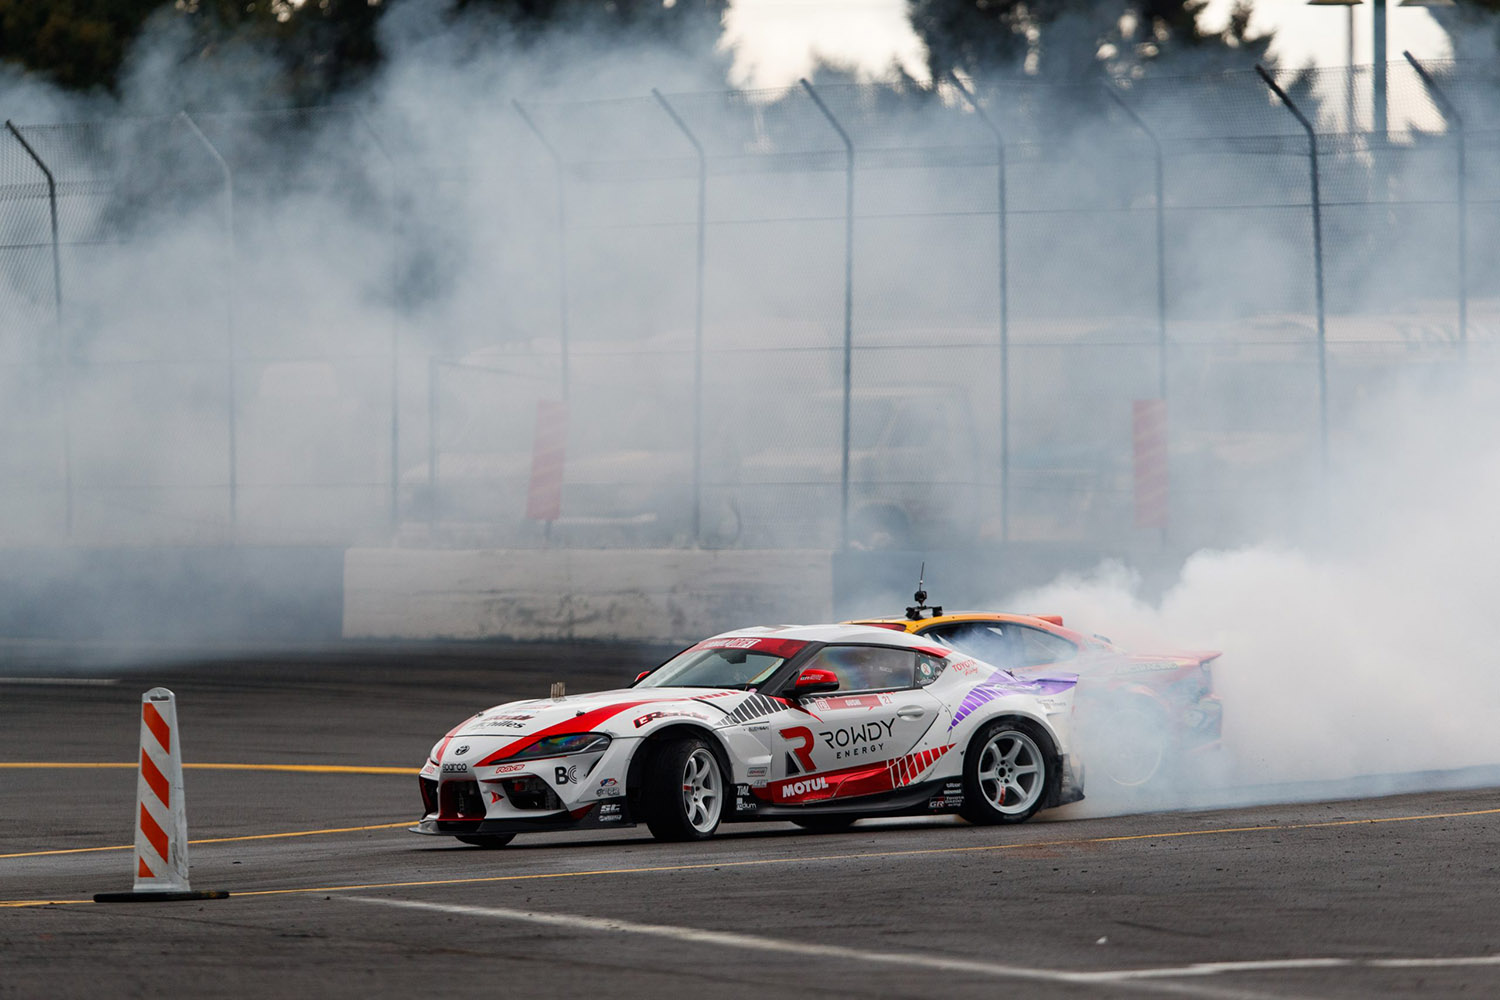 Toyota Supra in white and red drifting with white smoke and a competitor behind it on a track